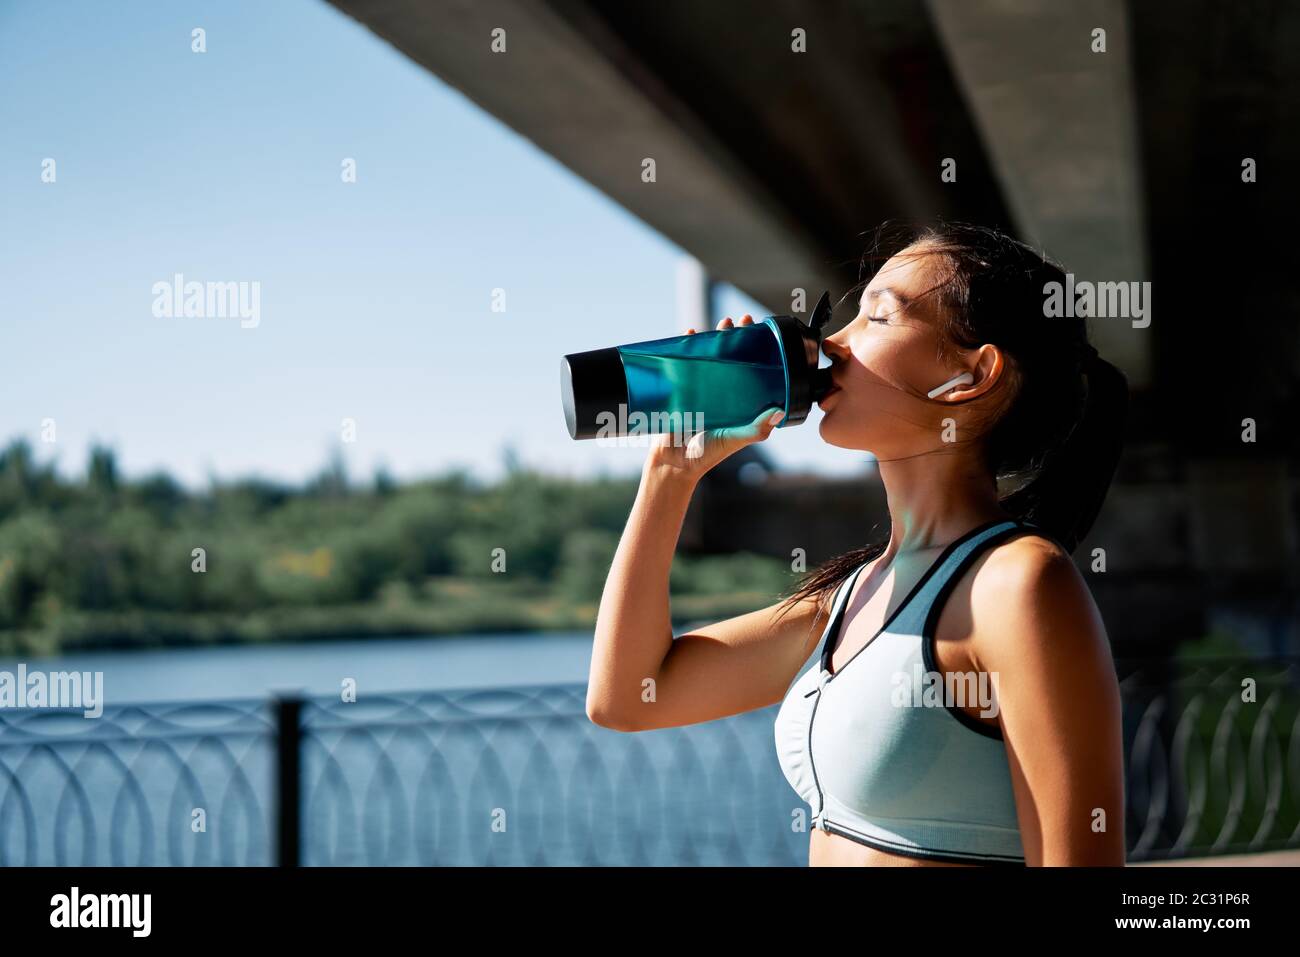 Young fitness woman drinking water from bottle Stock Photo